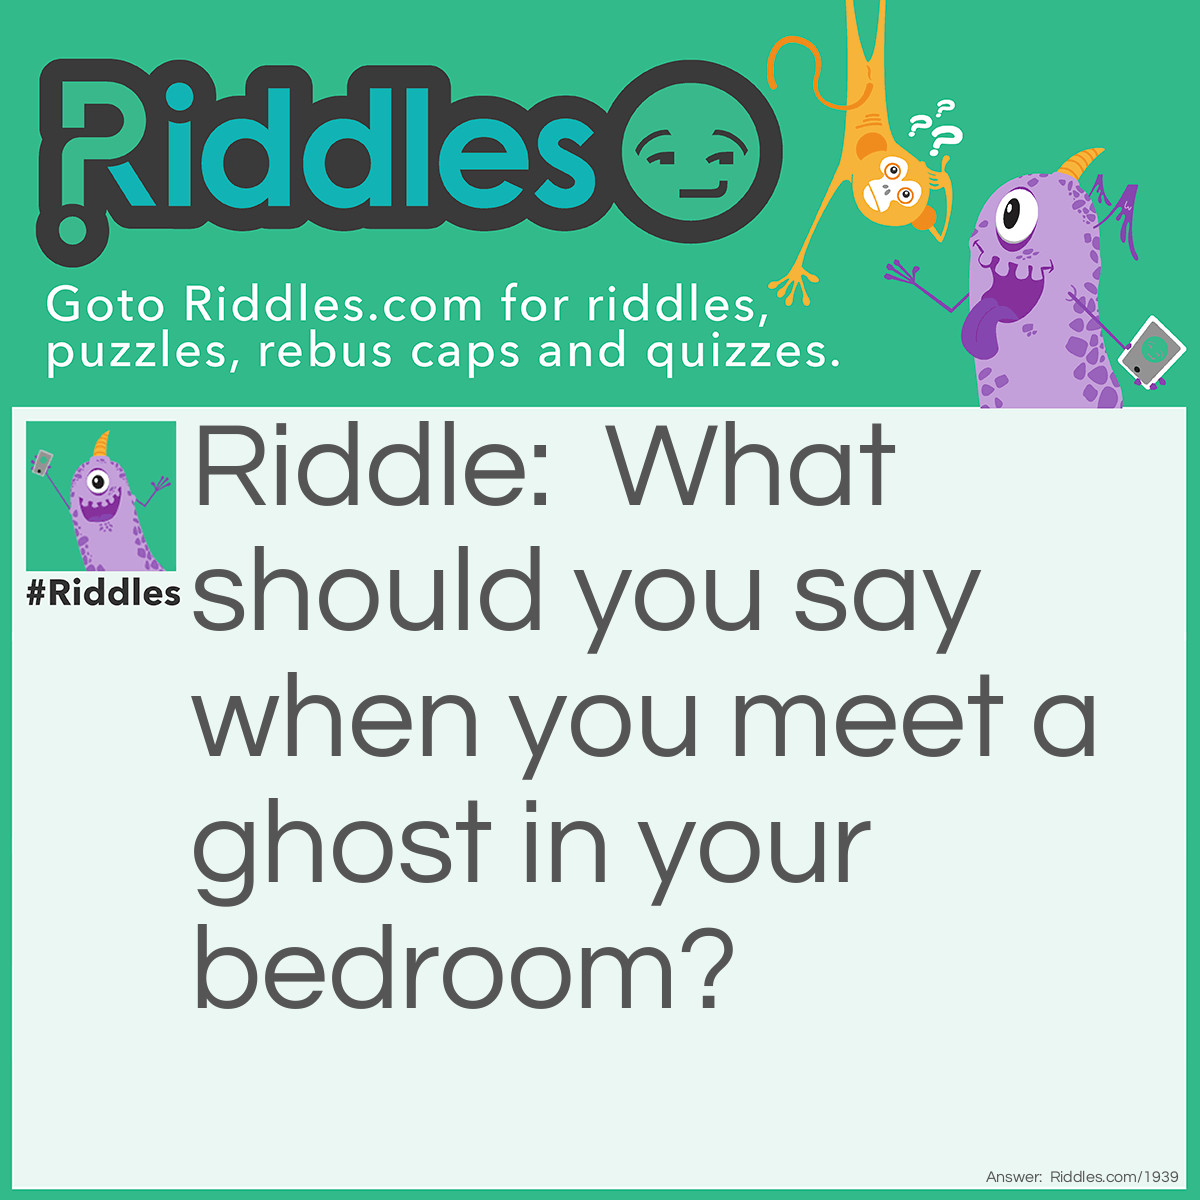 Riddle: What should you say when you meet a ghost in your bedroom? Answer: "How do you boo?"